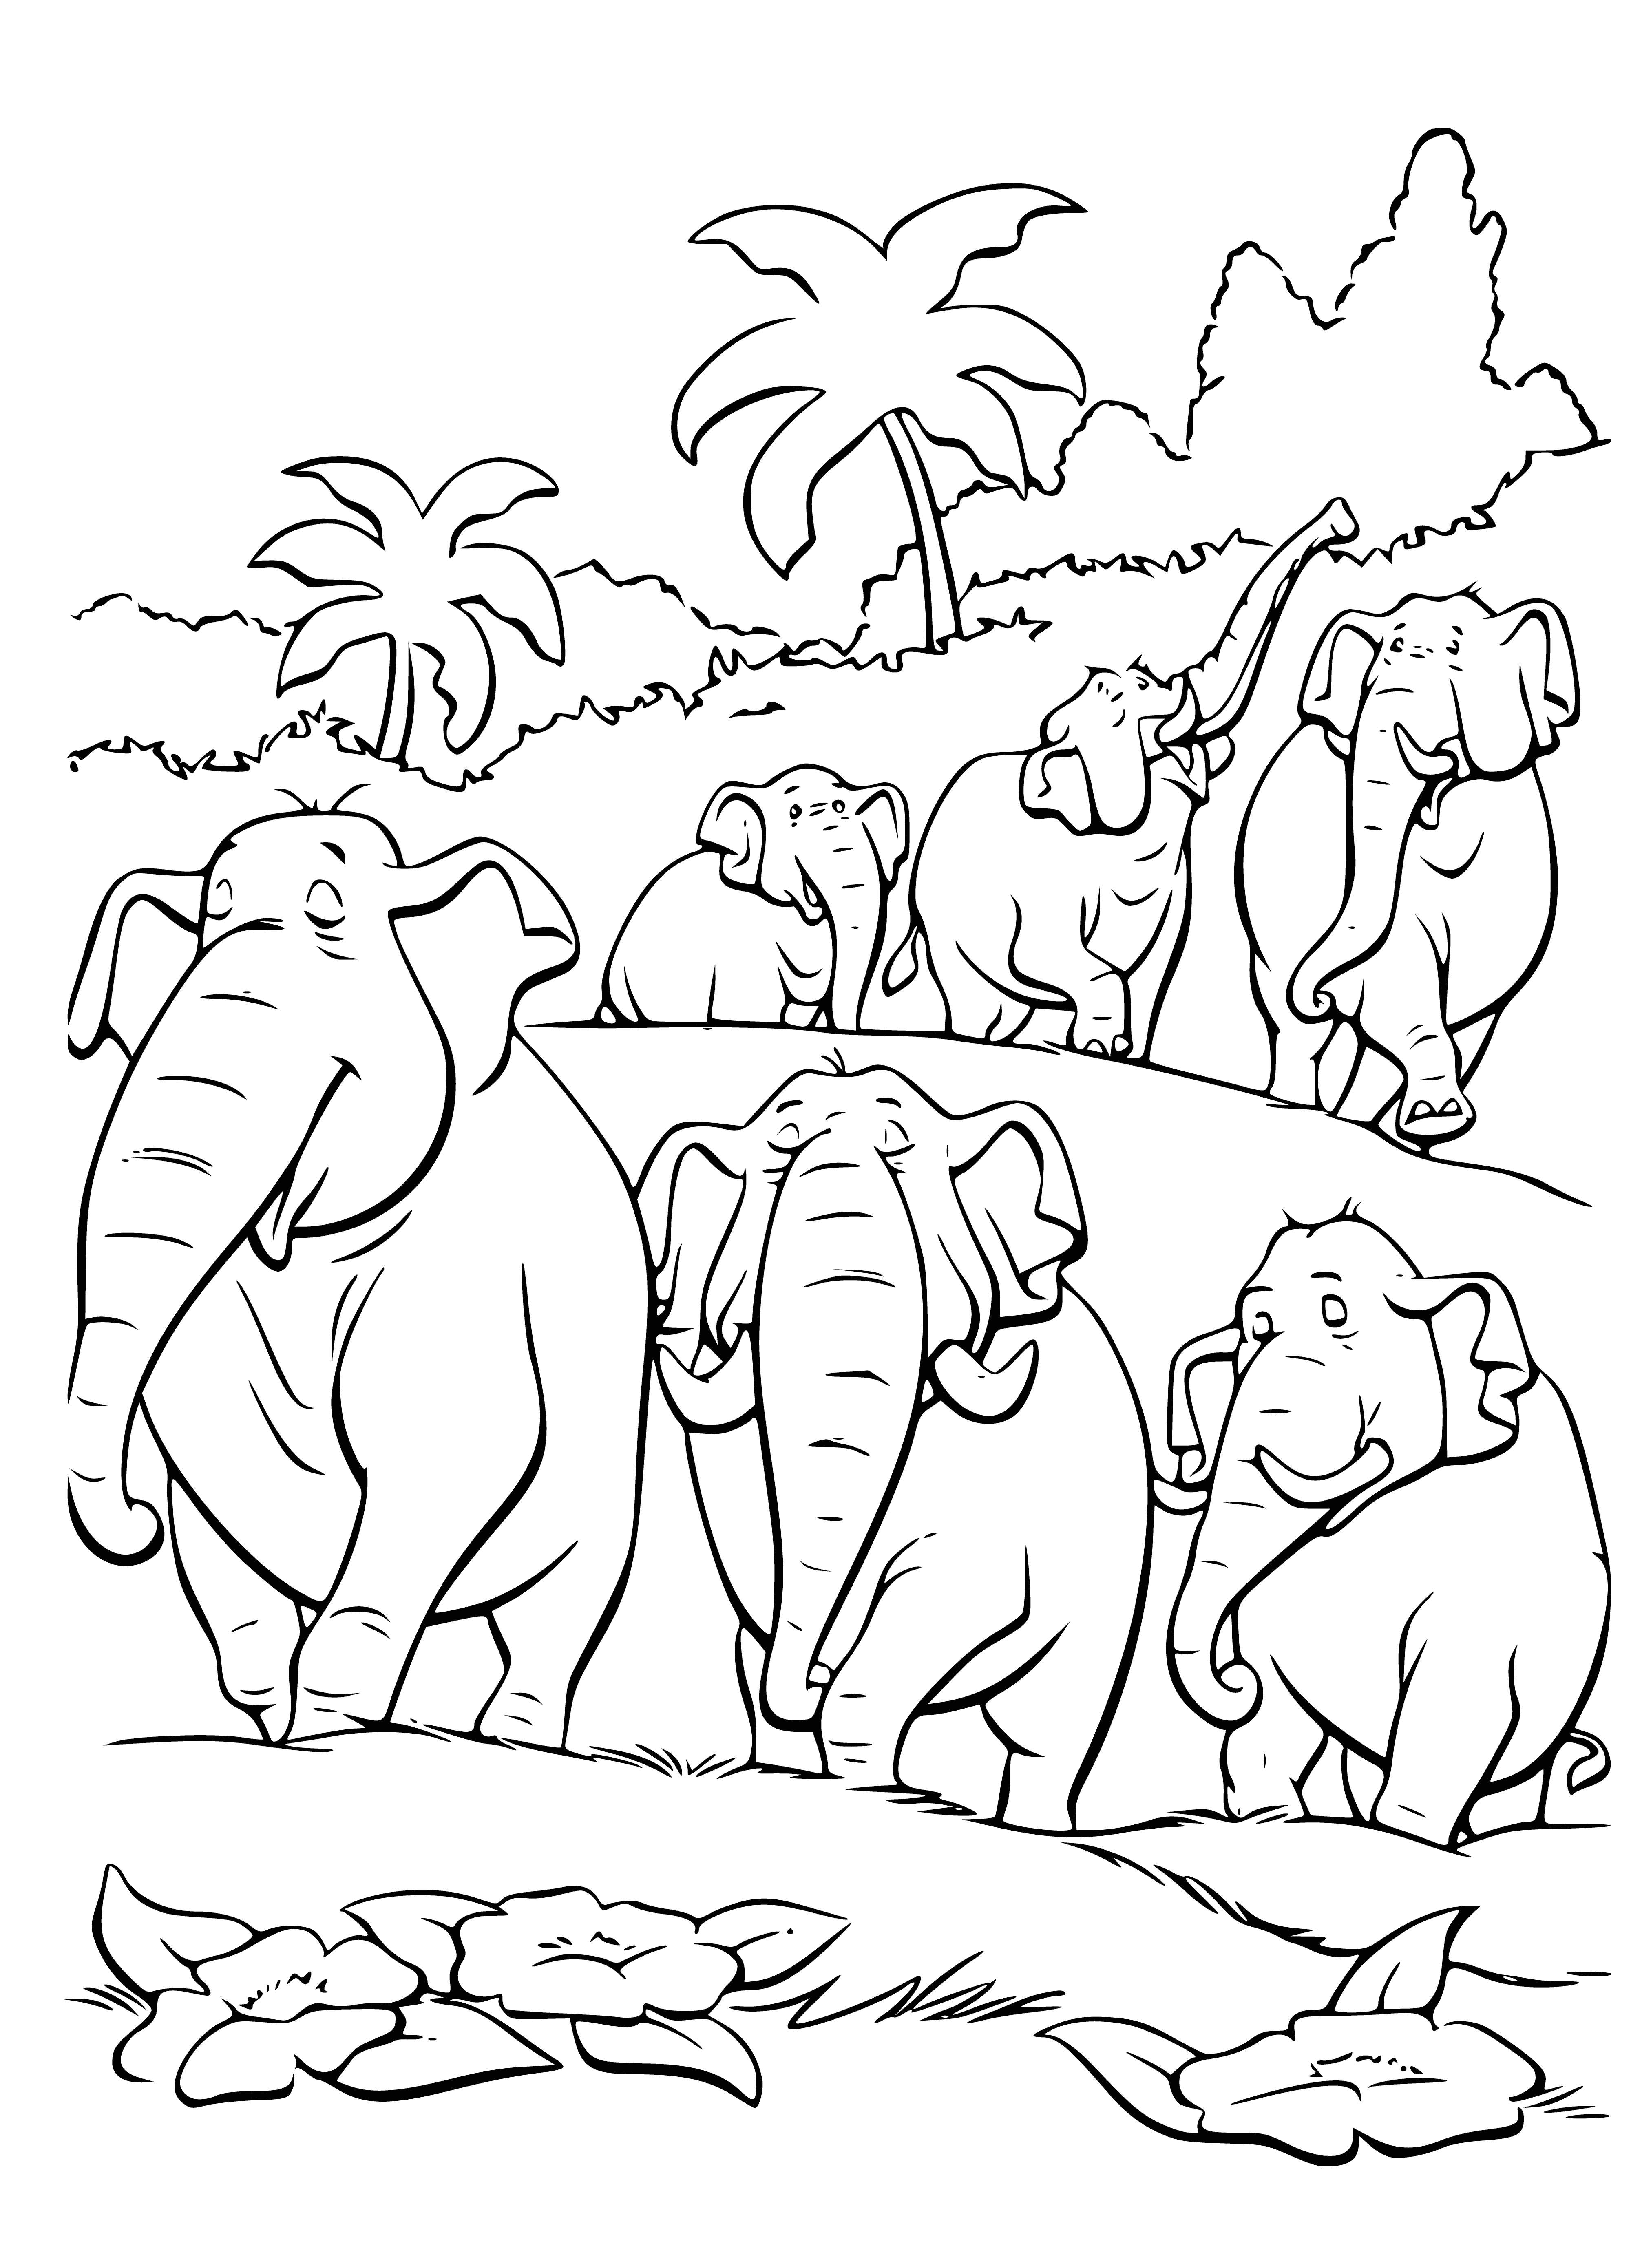 Elephant soldiers coloring page